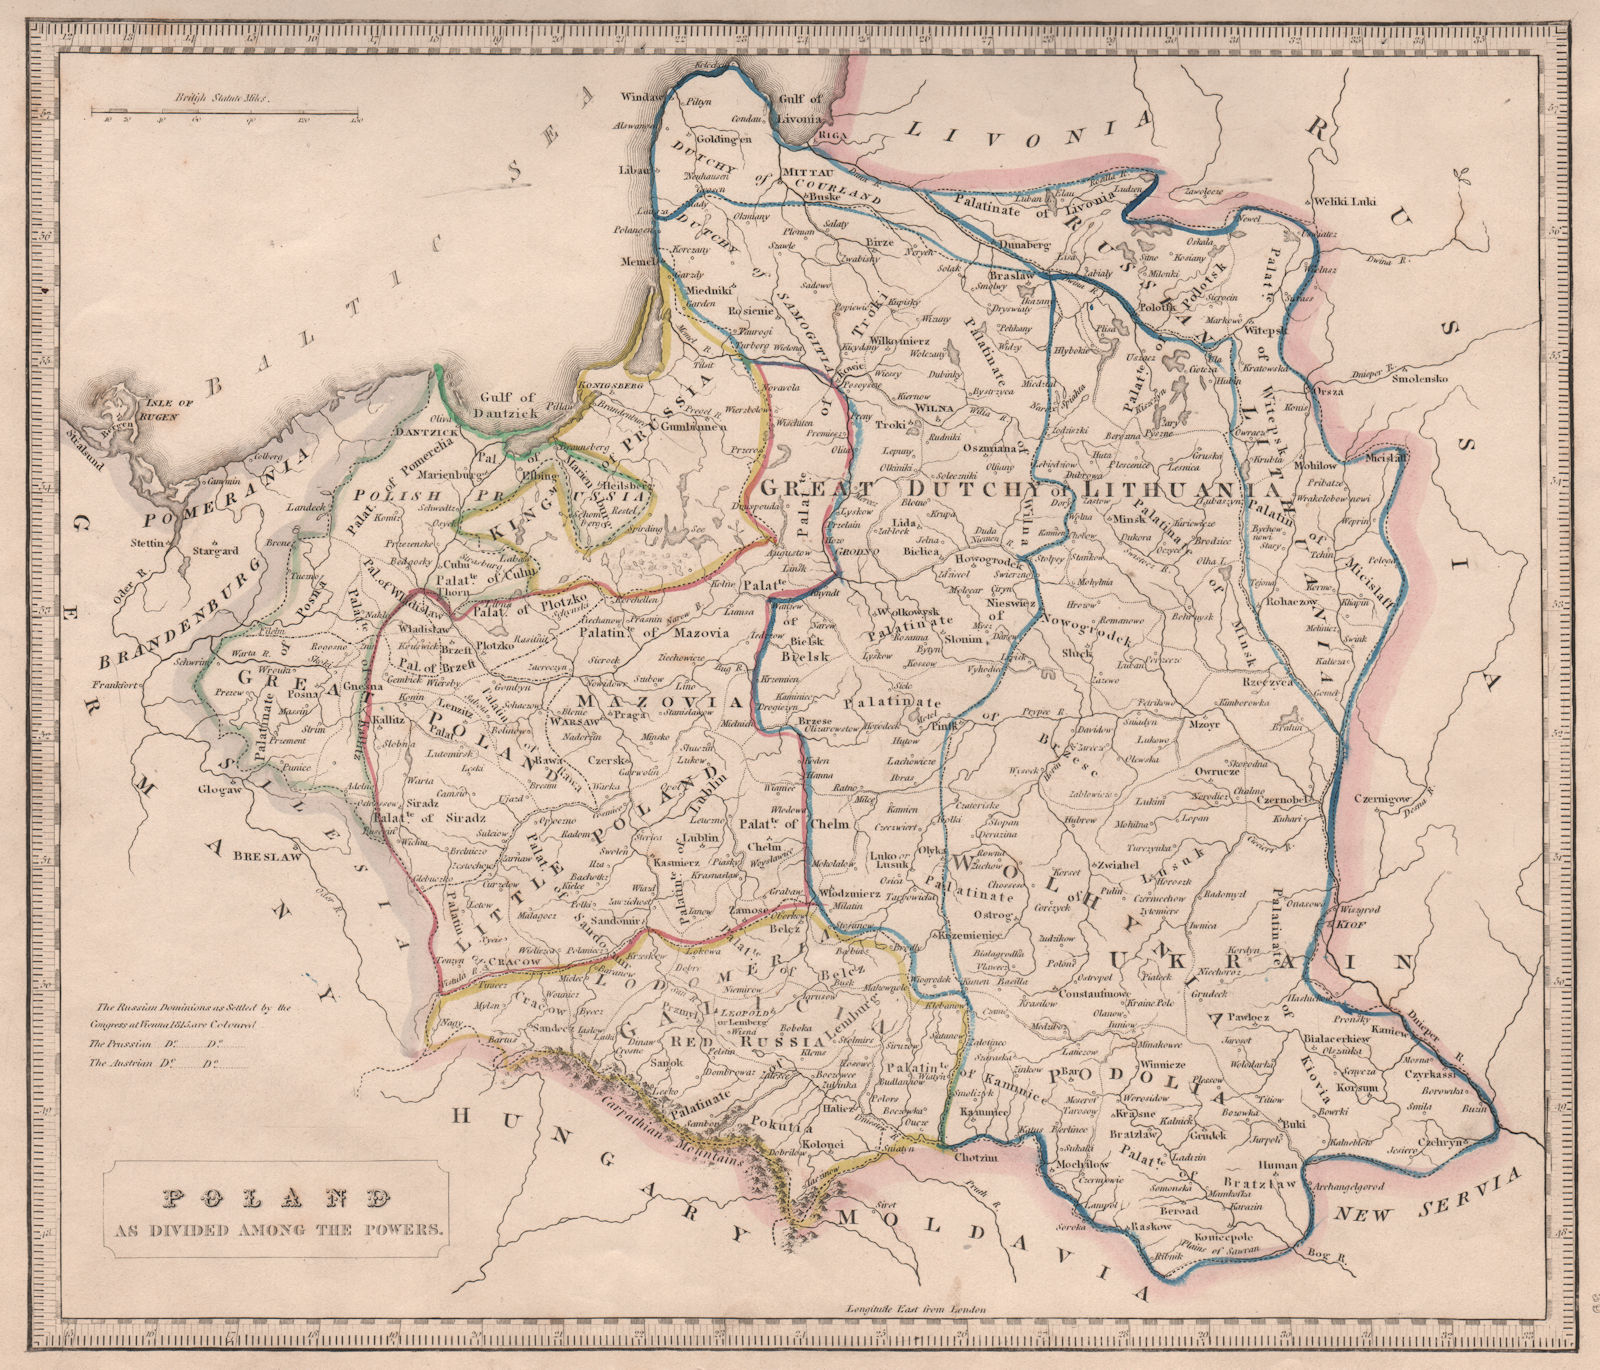 'POLAND AS DIVIDED AMONG THE POWERS'. Prussia Russia Austria. JOHNSON 1850 map